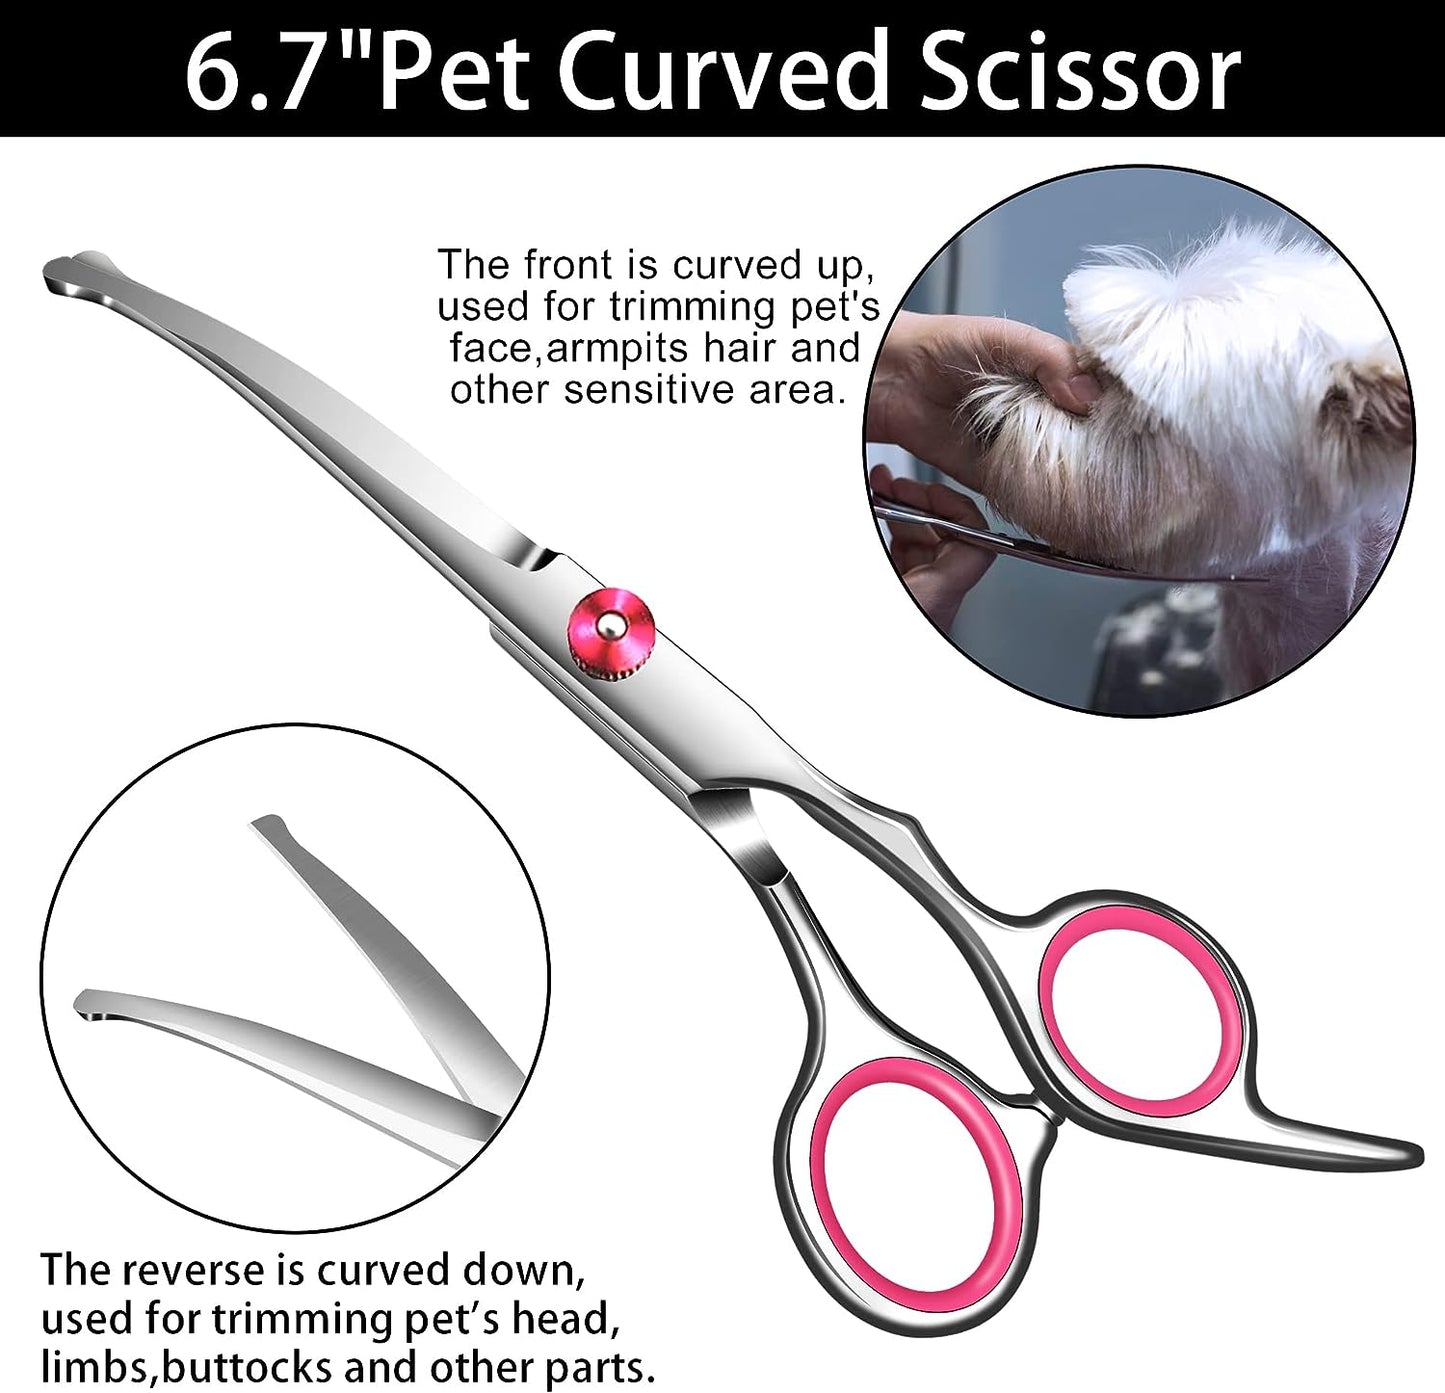 Professional Stainless Steel 4 Piece Grooming Set for Dogs & Cats - Safety Rounded Tips!